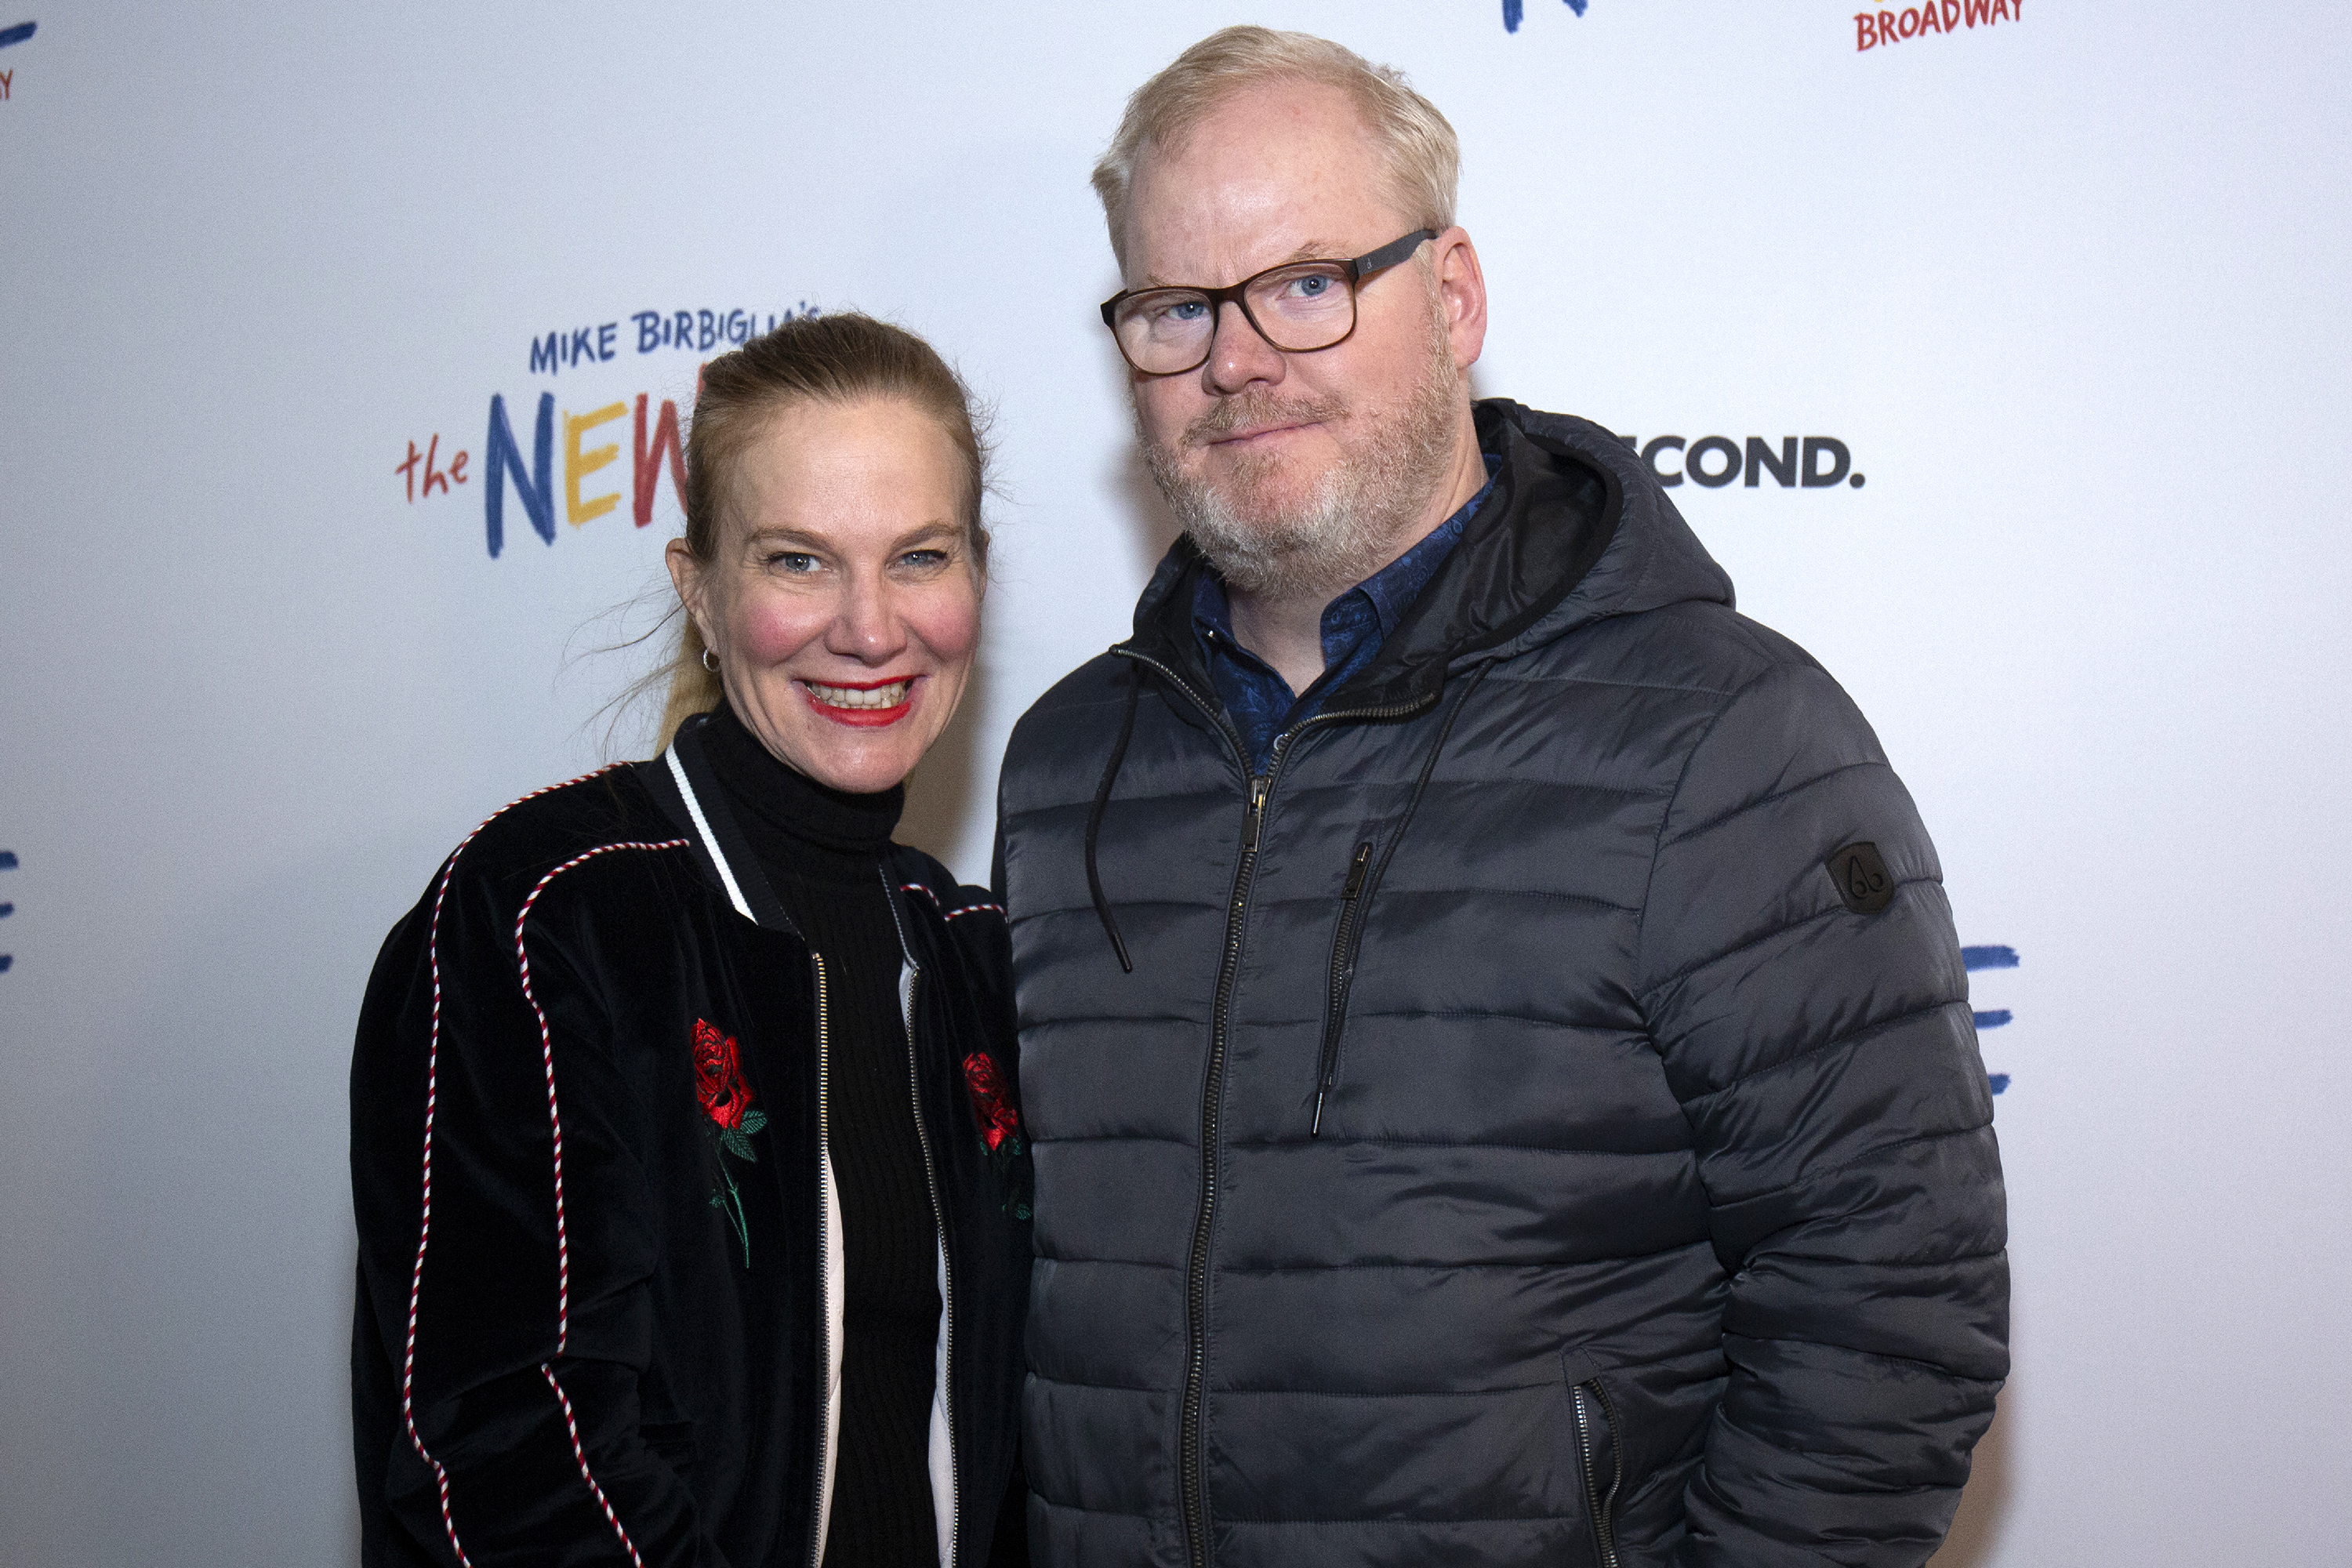 Jeannie and Jim Gaffigan at the "The New One" Broadway Opening Night on November 11, 2018, in New York City. | Source: Getty Images